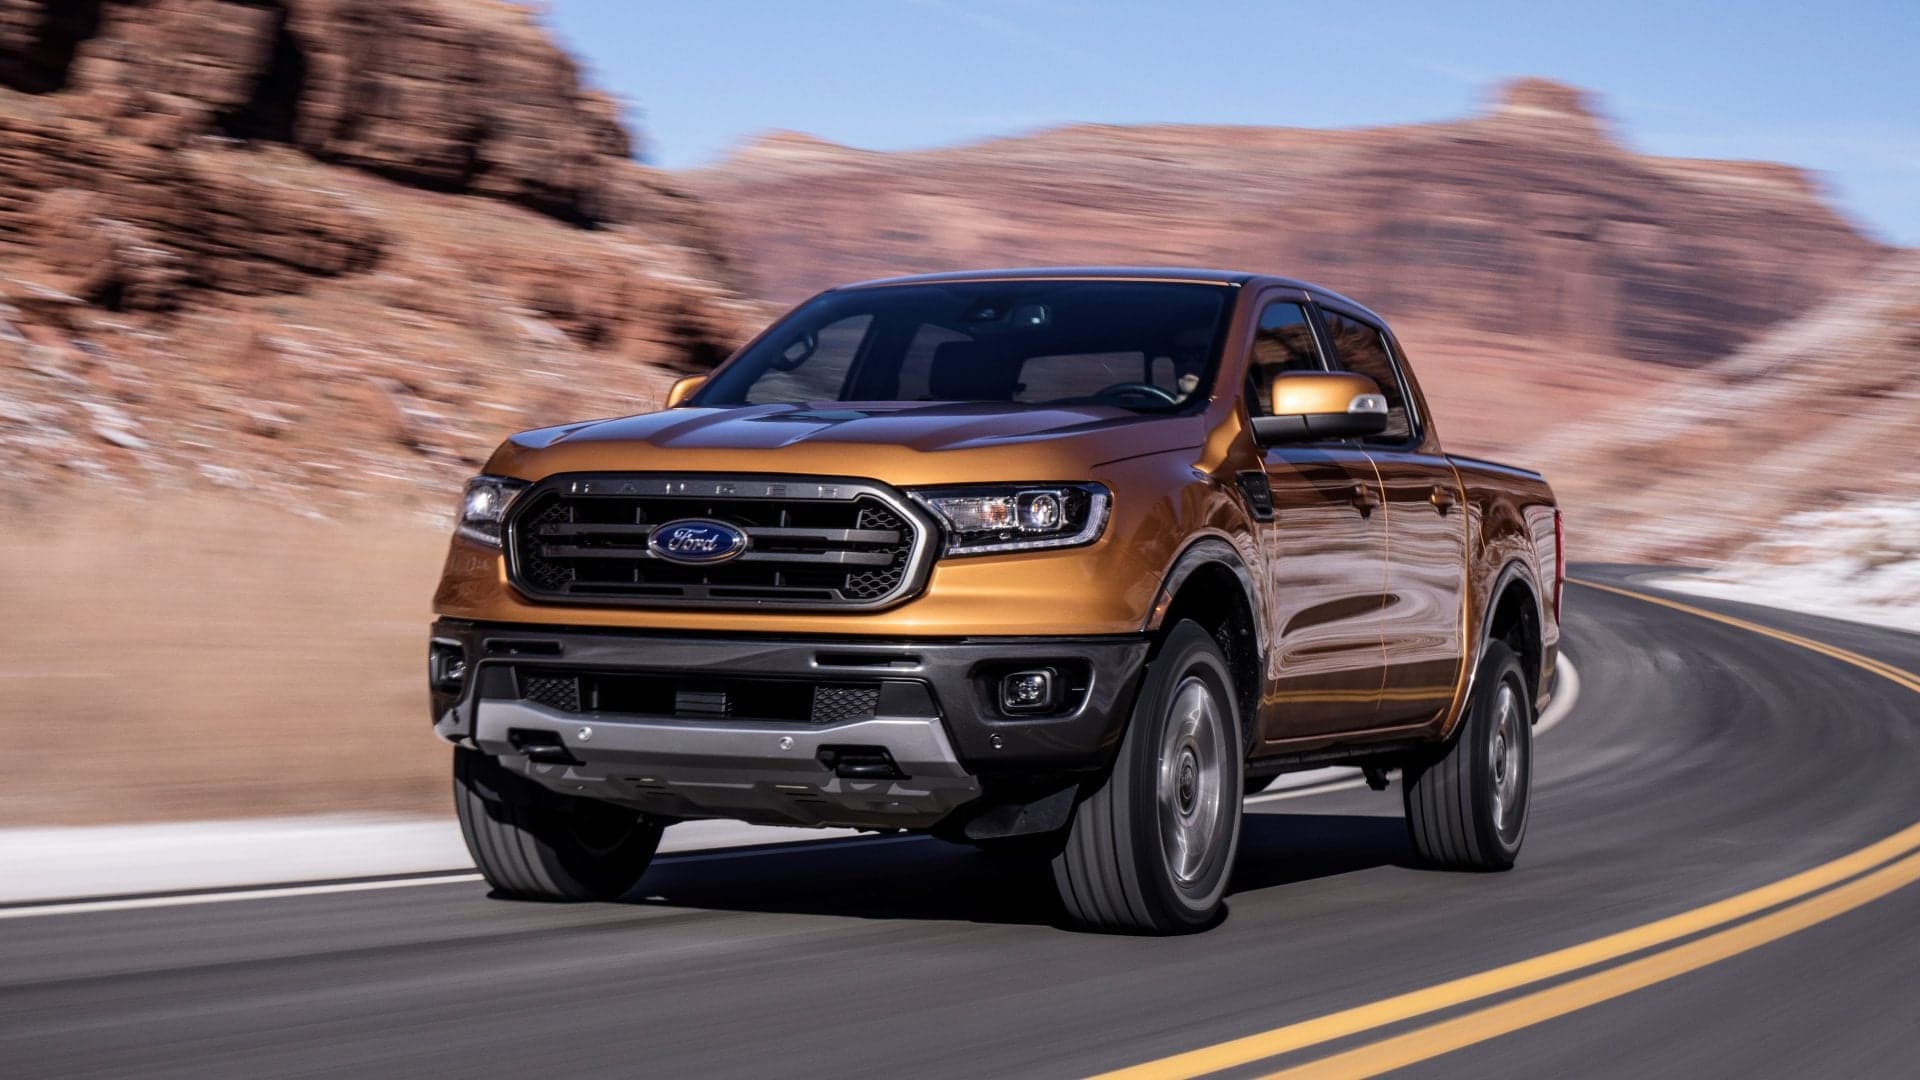 2019 Ford Ranger Pickup Truck Posts Mediocre Q1 Sales, Trails Behind Nissan Frontier